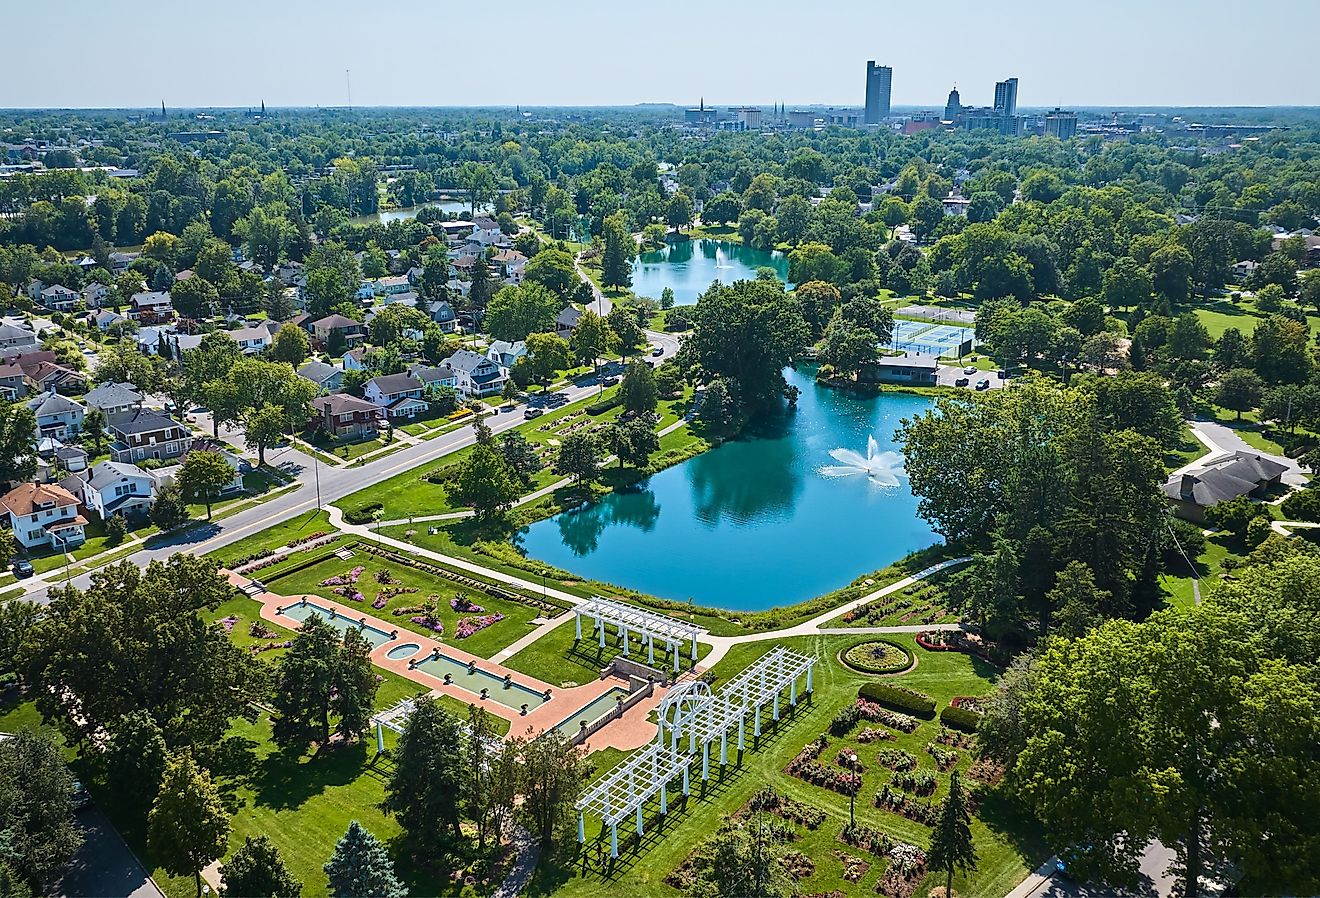 Aerial Lakeside Park gardens and fountains with distant downtown Fort Wayne.